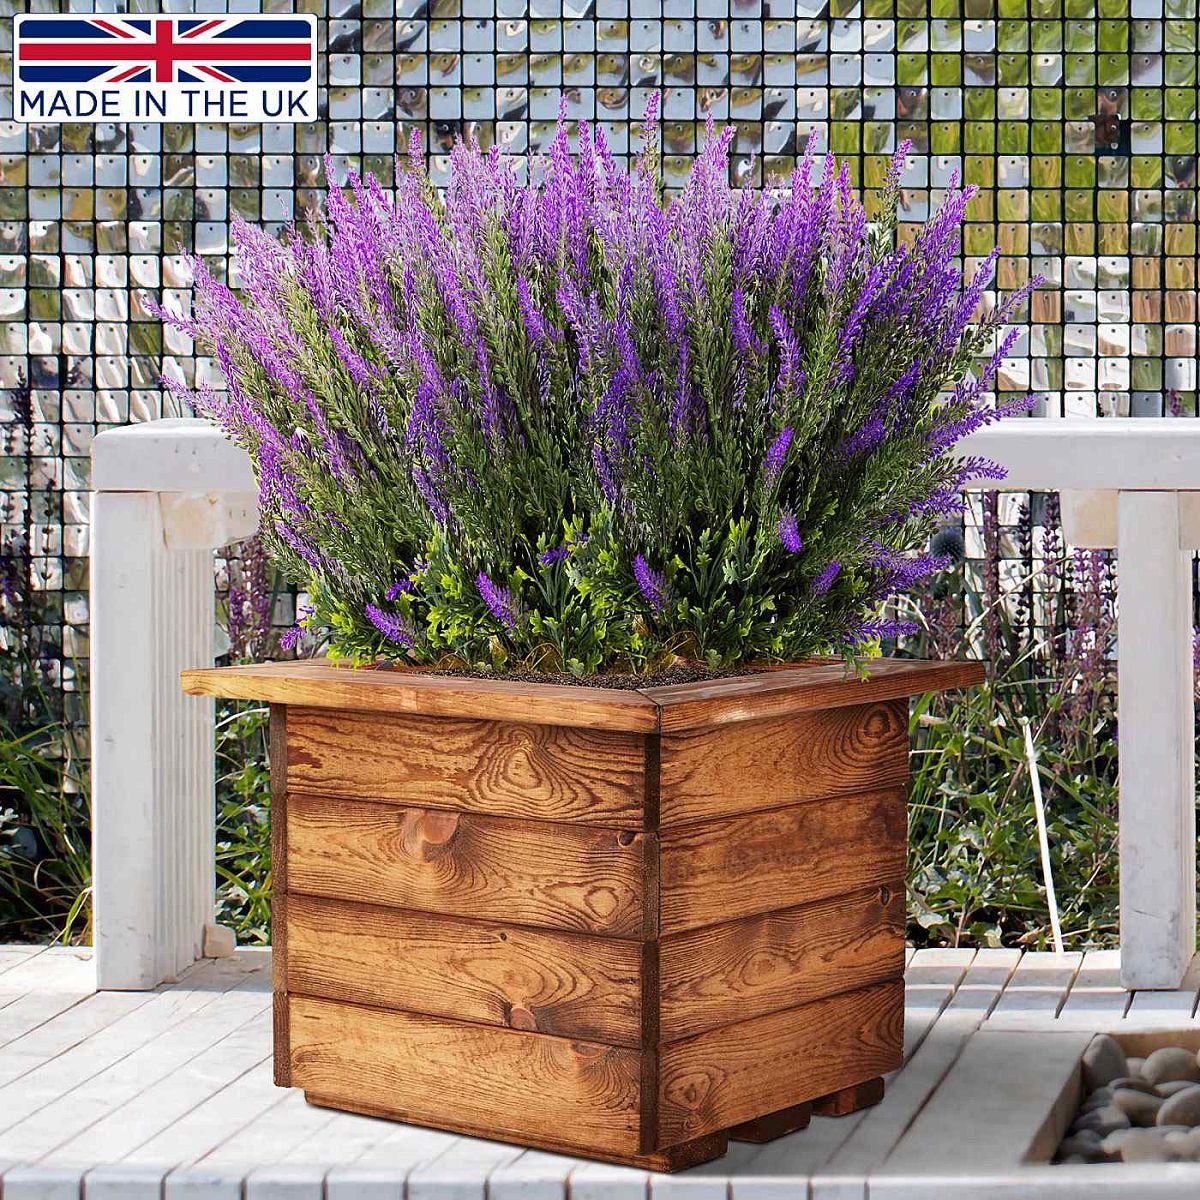 Hortico Square Wood Planter for Garden, Outdoor Plant Pot Made of Redwood, H31.5 L41.5 W41 cm, 53.6L